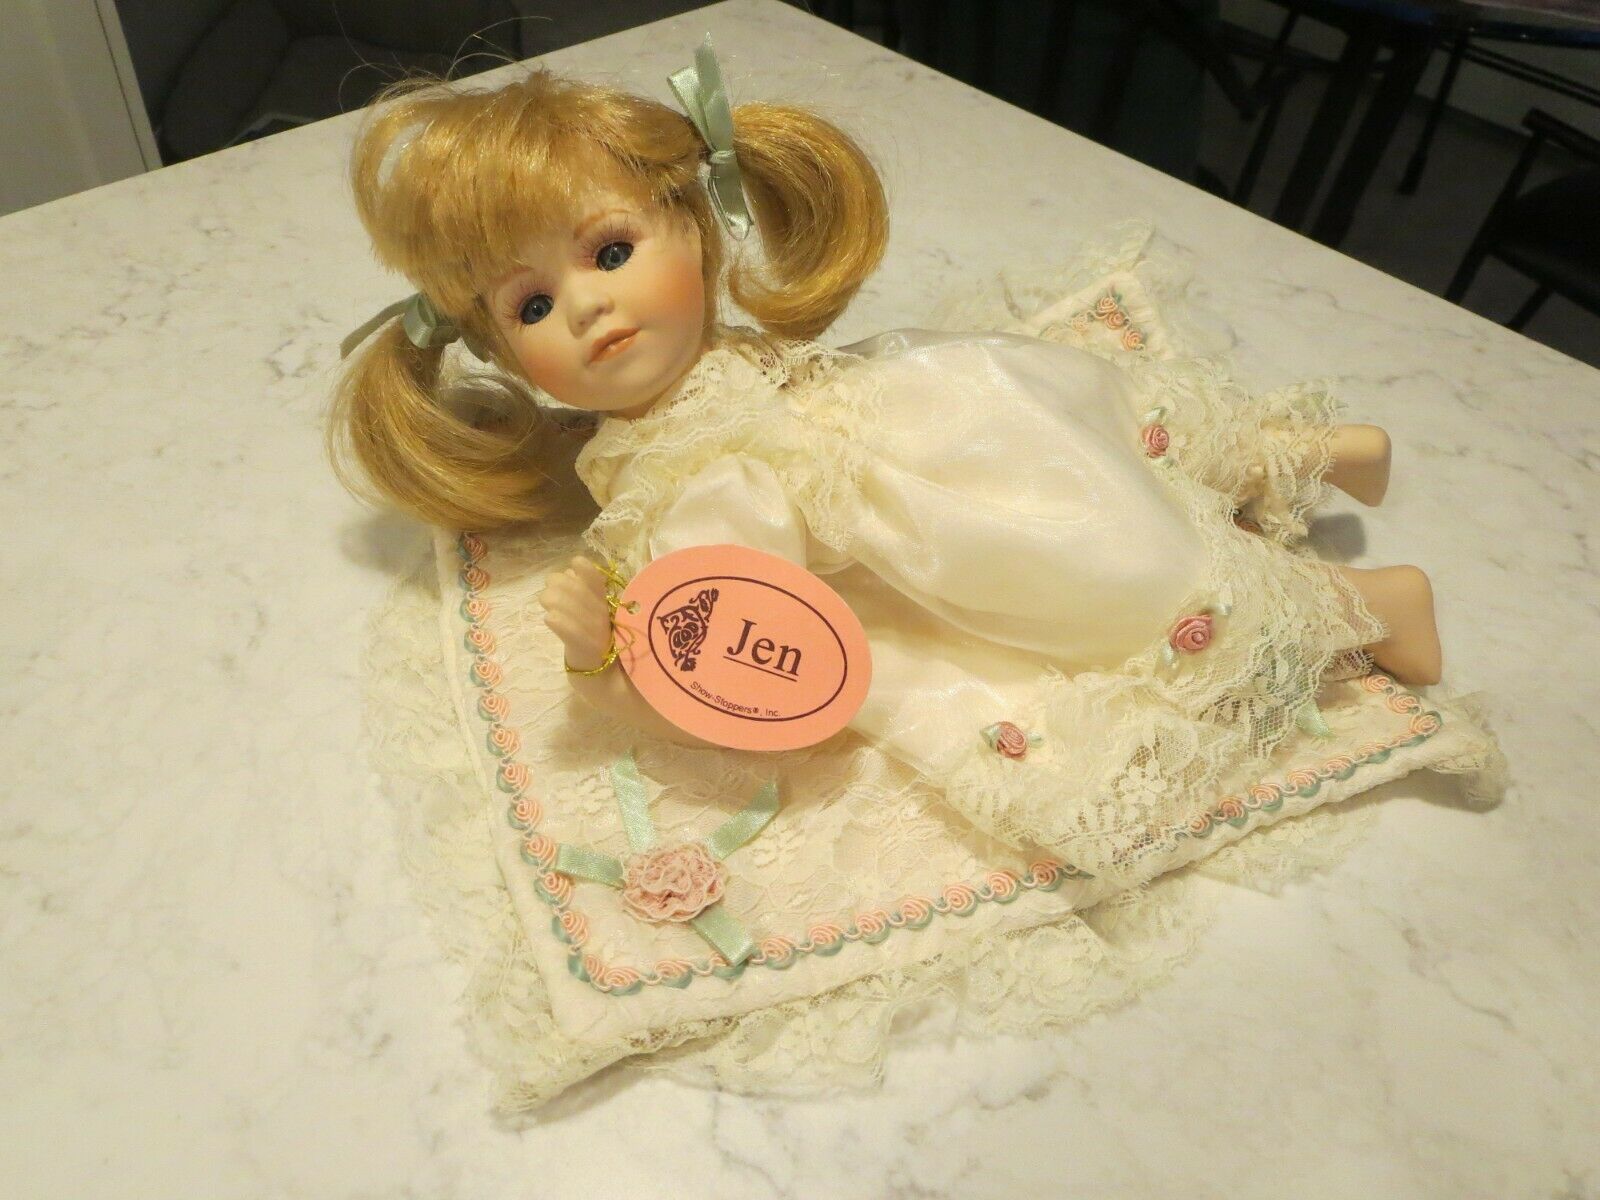 Jen "show Stoppers" Porcelain Doll, Around 12 Inches, Brand New No Box!